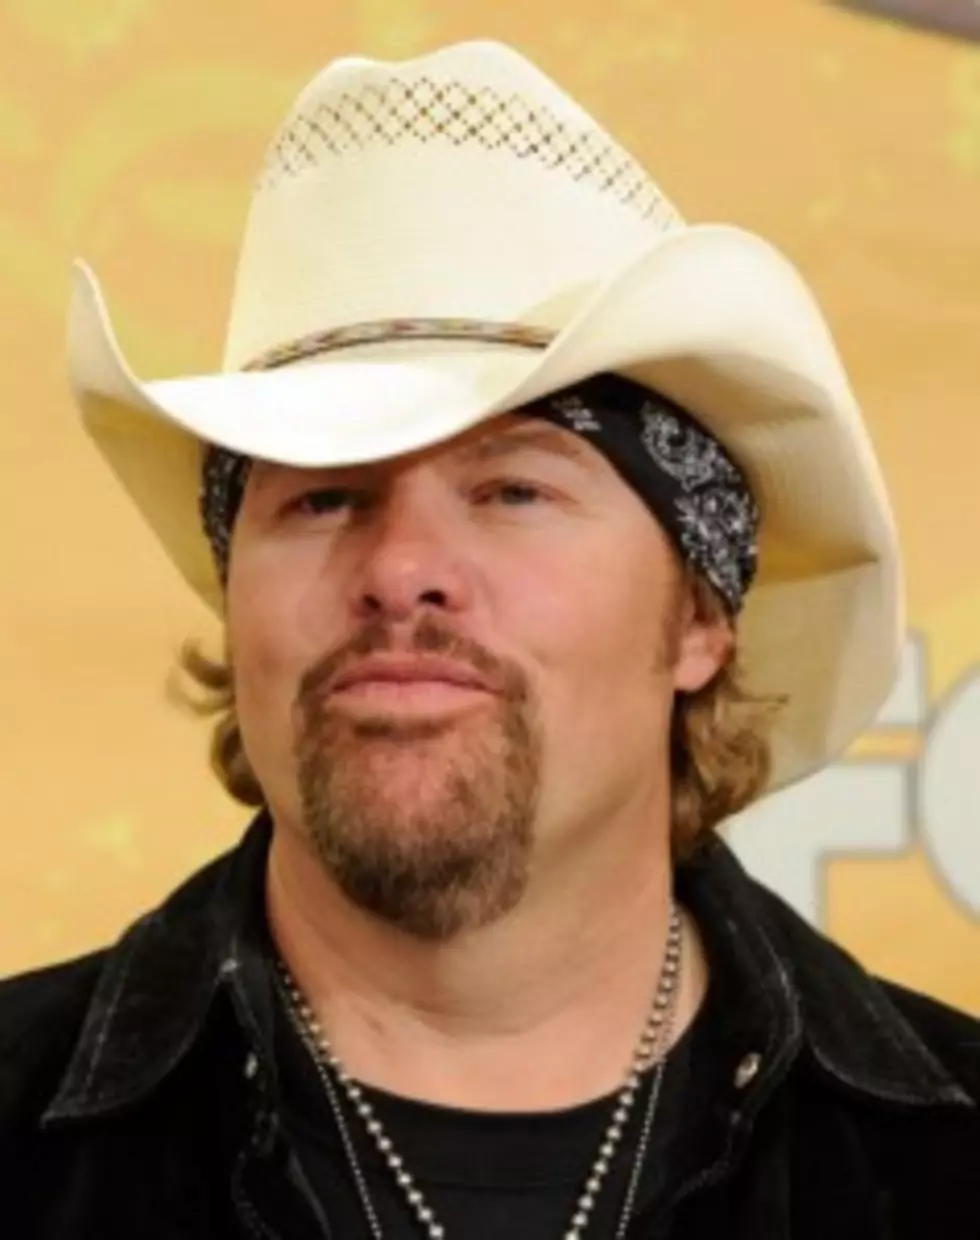 Toby Keith Is Playing Where?